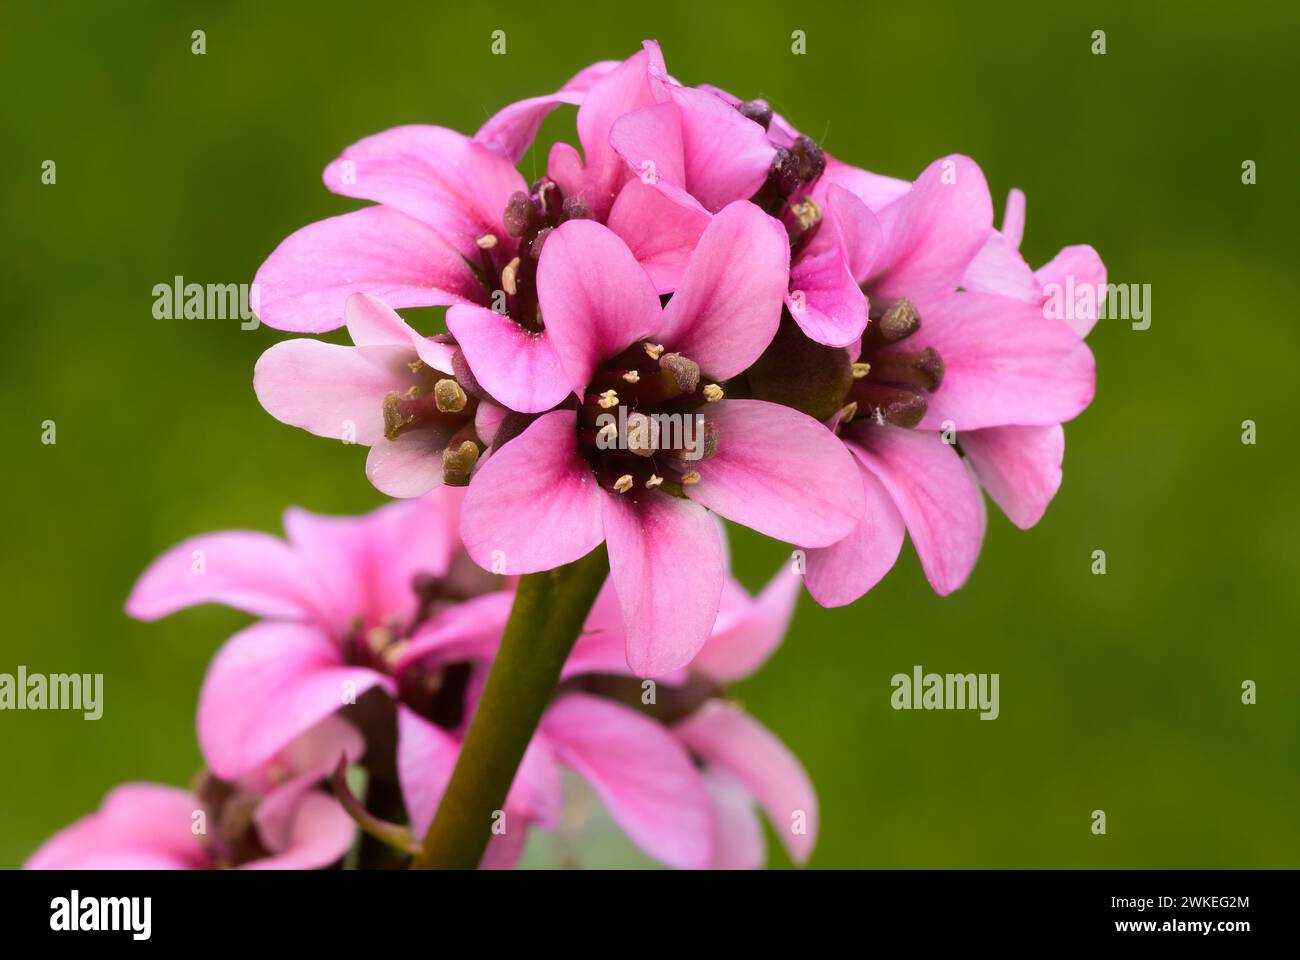 Bergenia flowers, Dragonfly sakura close up. Ornamental plant, perennial with pink petals. Isolated on green background, copy space. Trencin, Slovakia Stock Photo